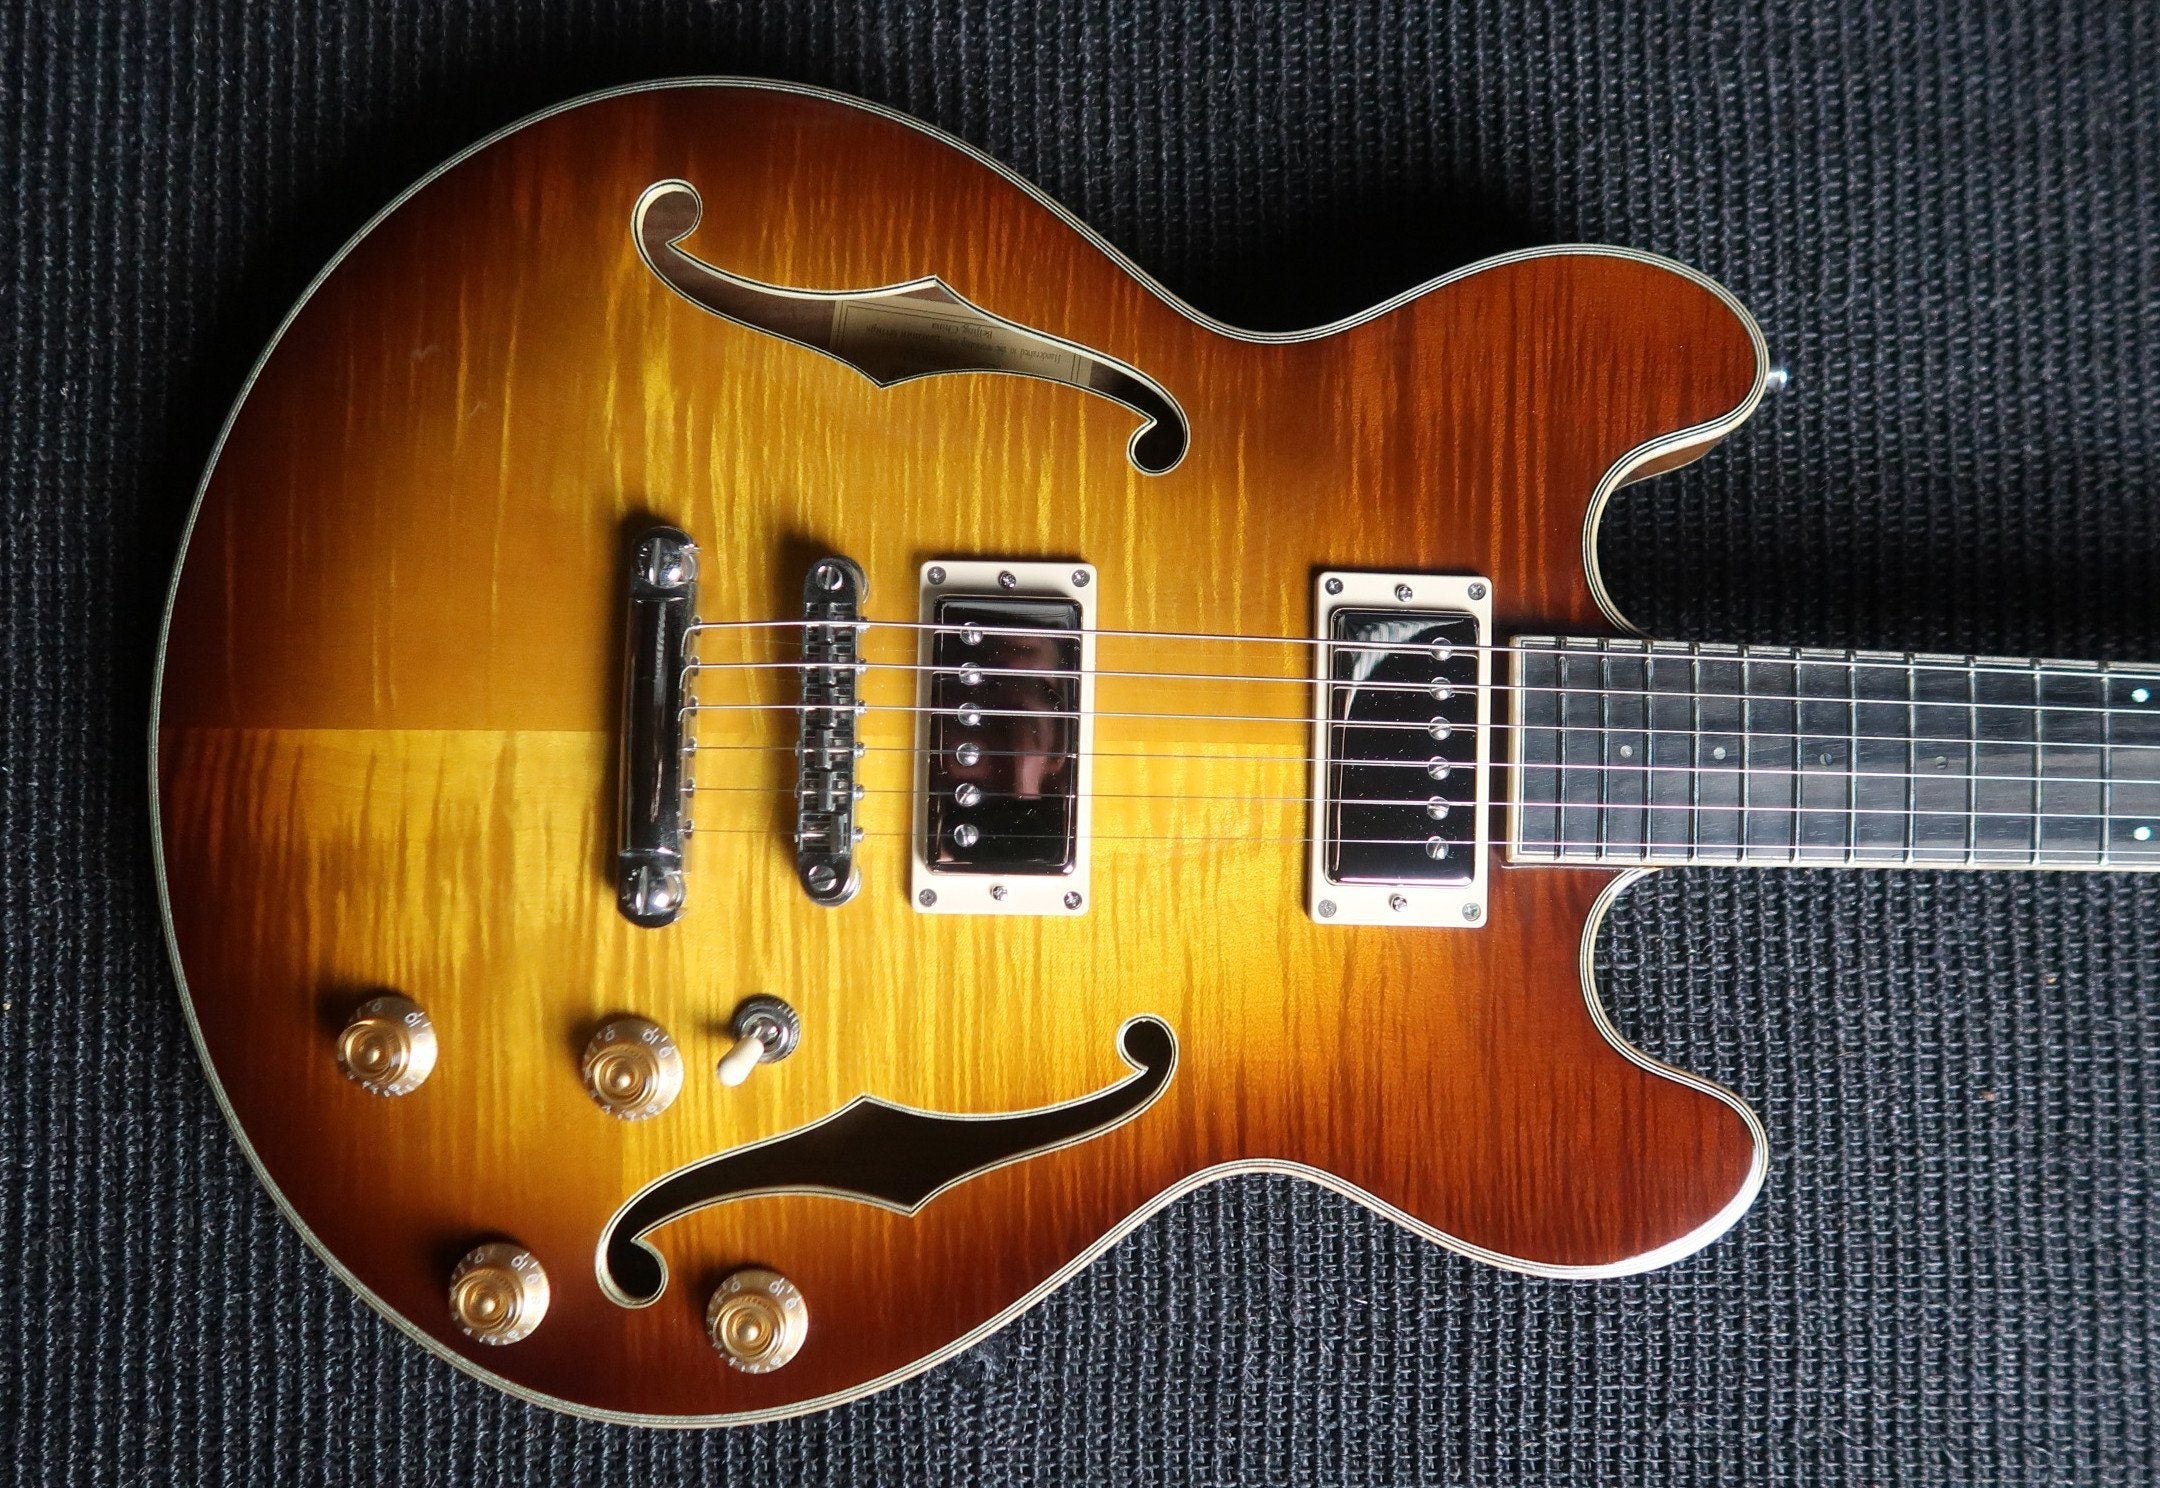 Eastman T184mx GB, Electric Guitar for sale at Richards Guitars.